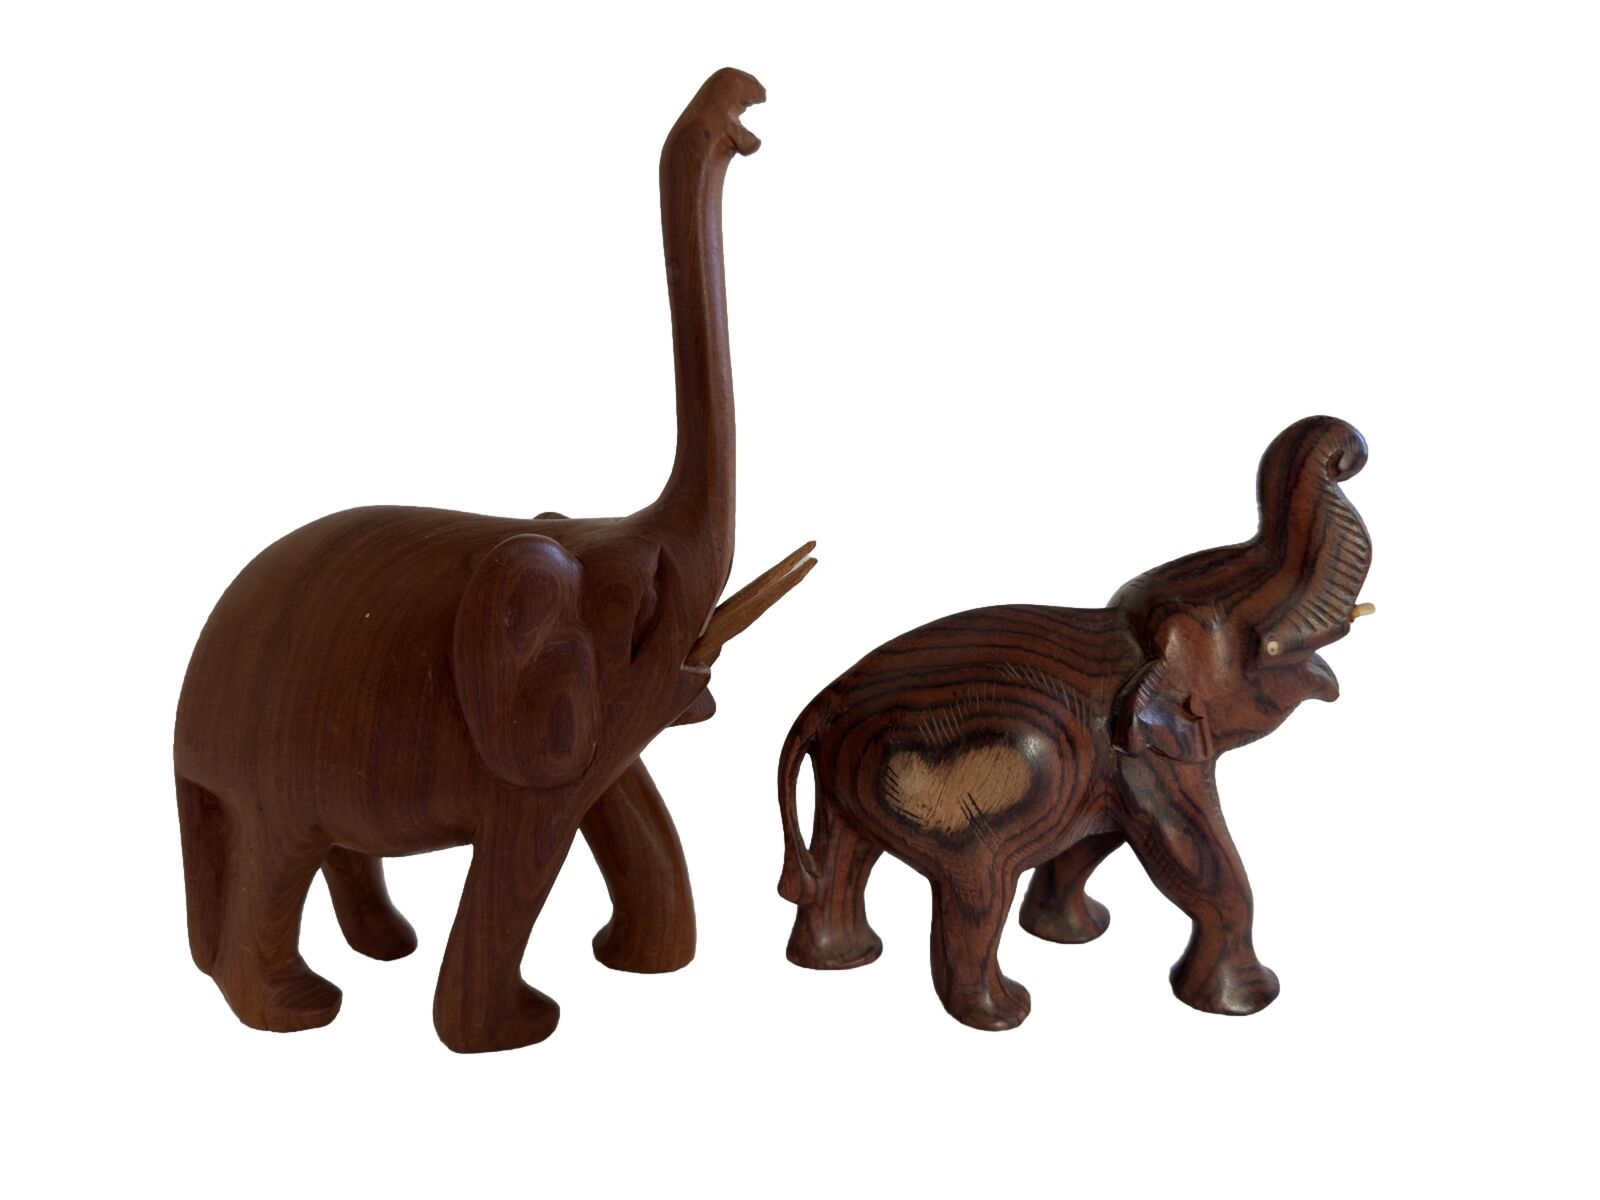 A Pair Hand Carved Wooden Elephant Statue Figure Animal